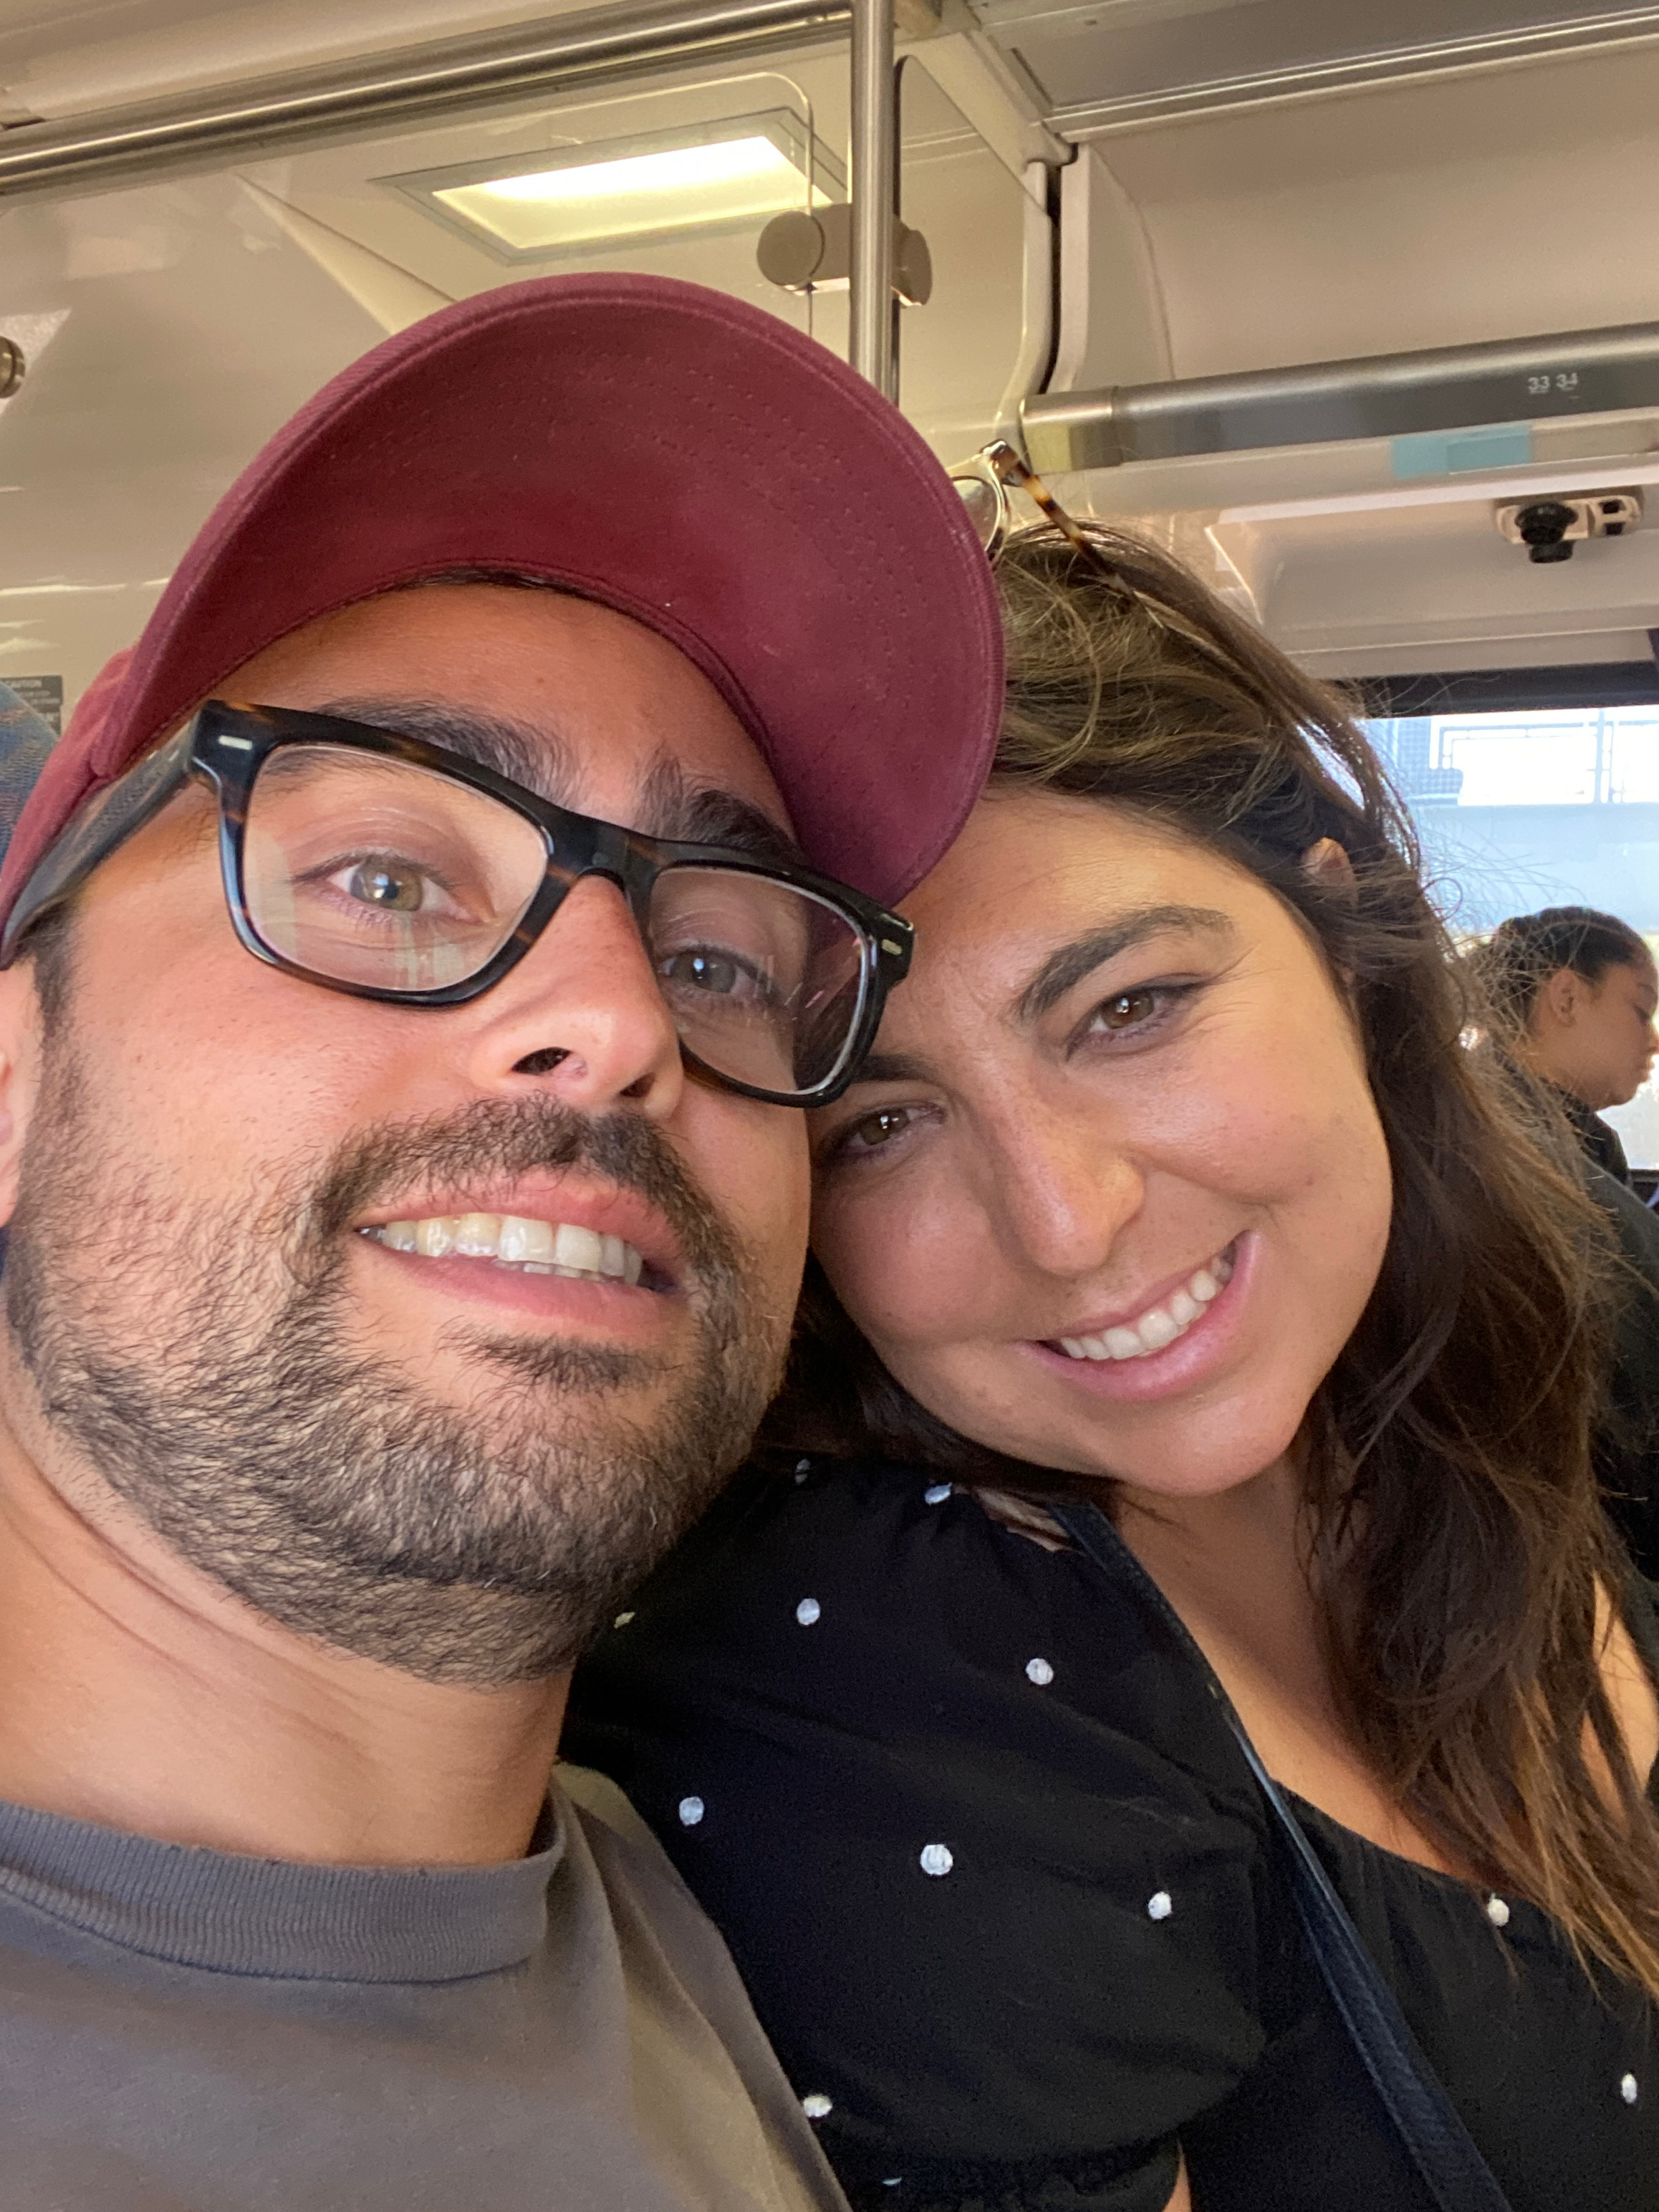 Me and wife riding Amtrak